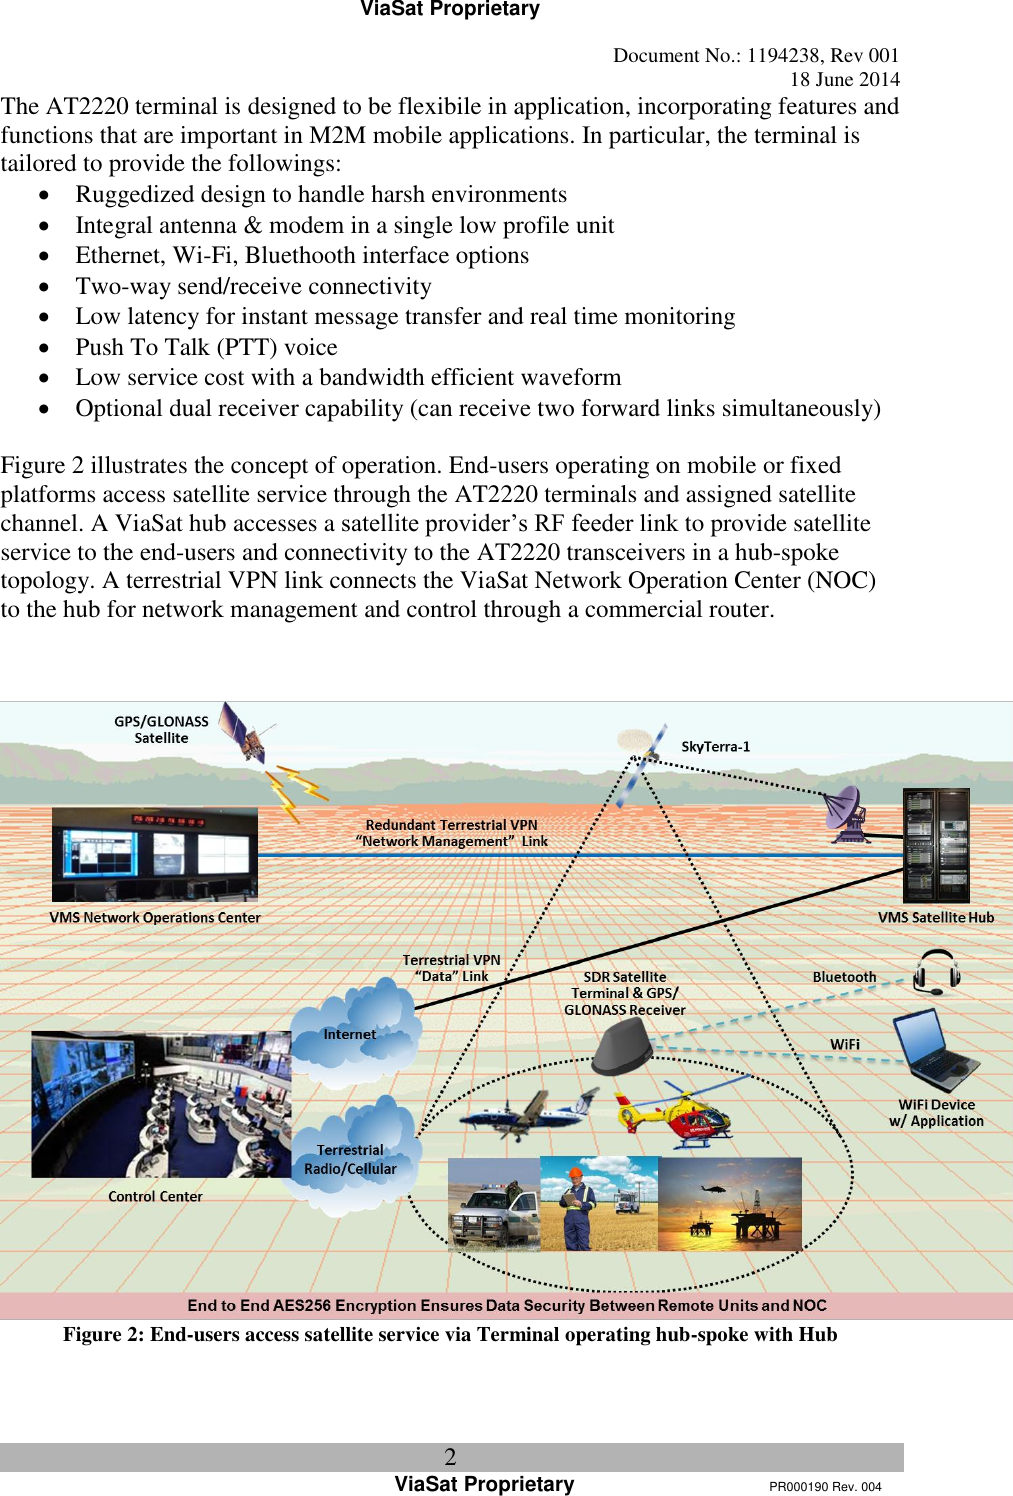 ViaSat Proprietary   Document No.: 1194238, Rev 001  18 June 2014 2 ViaSat Proprietary      PR000190 Rev. 004 The AT2220 terminal is designed to be flexibile in application, incorporating features and functions that are important in M2M mobile applications. In particular, the terminal is tailored to provide the followings:  Ruggedized design to handle harsh environments  Integral antenna &amp; modem in a single low profile unit  Ethernet, Wi-Fi, Bluethooth interface options  Two-way send/receive connectivity  Low latency for instant message transfer and real time monitoring  Push To Talk (PTT) voice   Low service cost with a bandwidth efficient waveform  Optional dual receiver capability (can receive two forward links simultaneously)  Figure 2 illustrates the concept of operation. End-users operating on mobile or fixed platforms access satellite service through the AT2220 terminals and assigned satellite channel. A ViaSat hub accesses a satellite provider’s RF feeder link to provide satellite service to the end-users and connectivity to the AT2220 transceivers in a hub-spoke topology. A terrestrial VPN link connects the ViaSat Network Operation Center (NOC) to the hub for network management and control through a commercial router.    Figure 2: End-users access satellite service via Terminal operating hub-spoke with Hub 